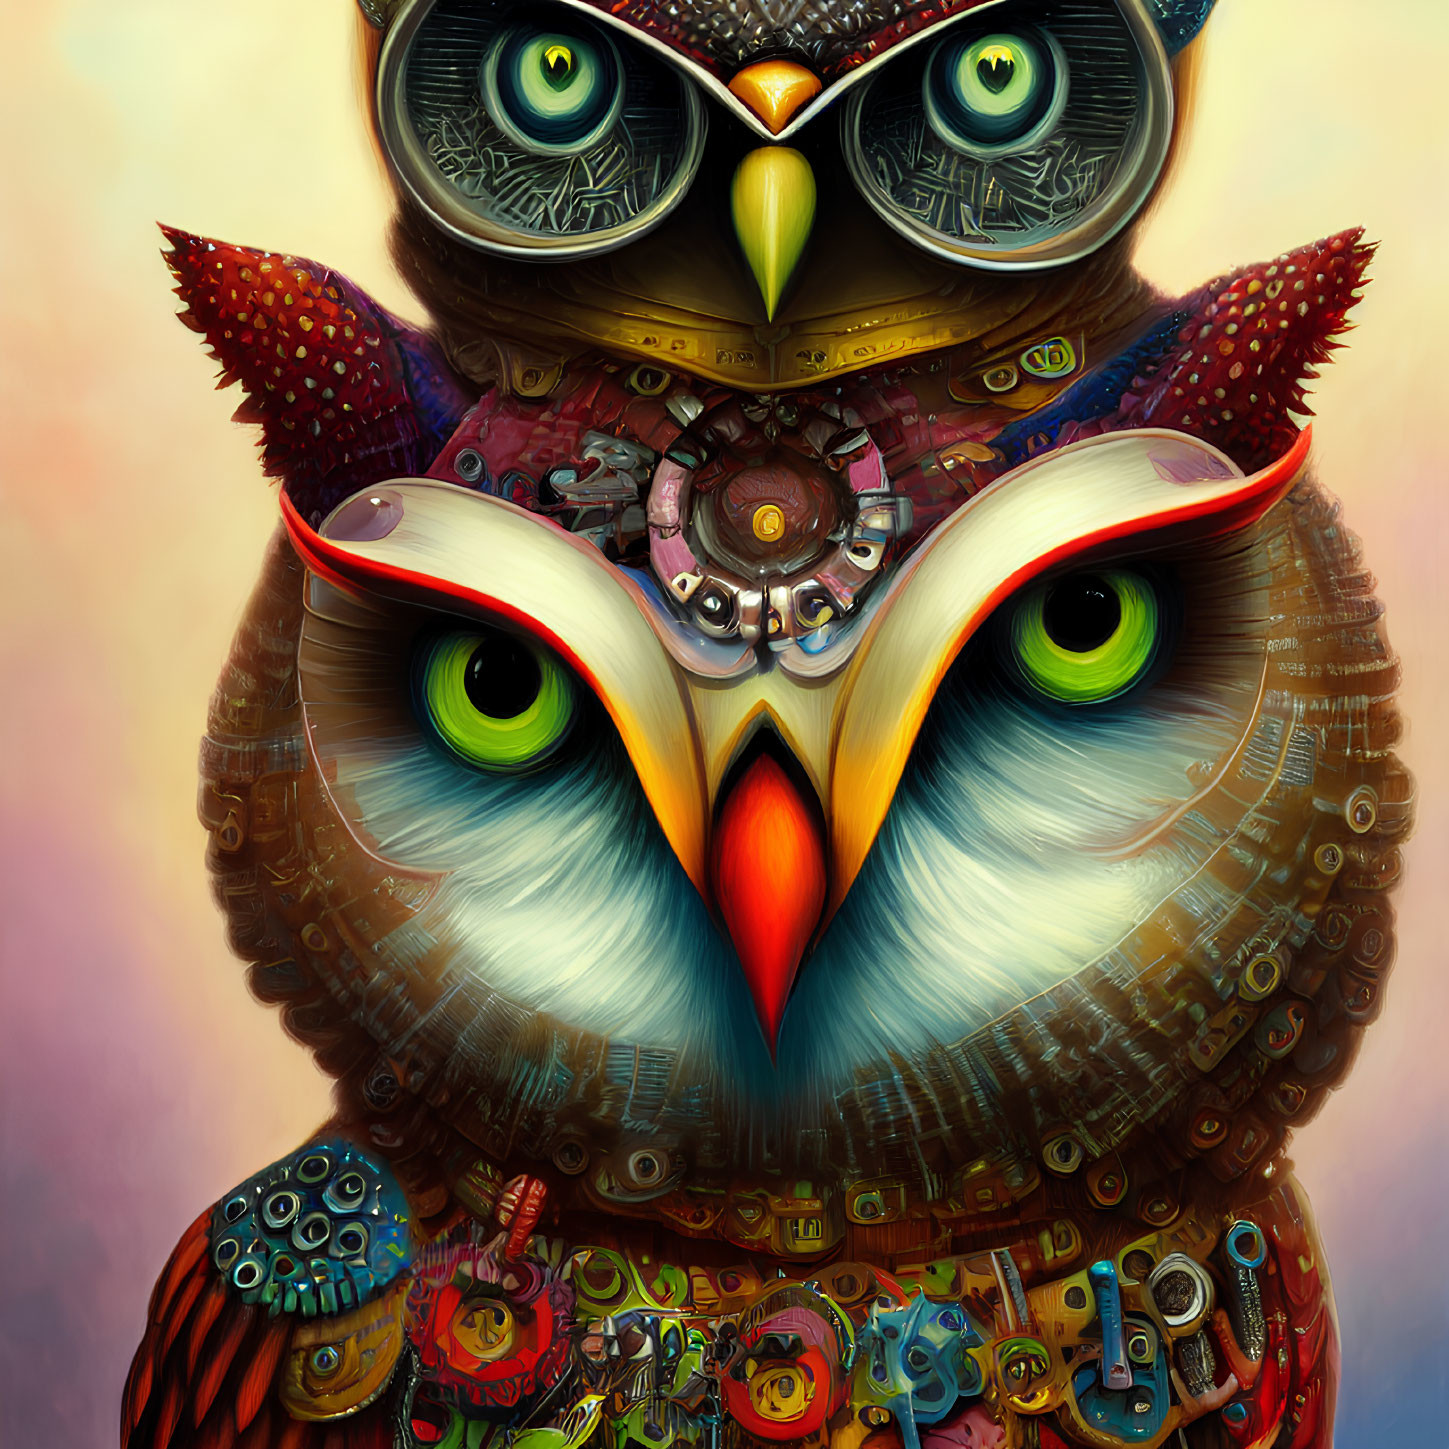 Colorful Mechanical Owl Illustration with Gears and Cogs on Warm Background